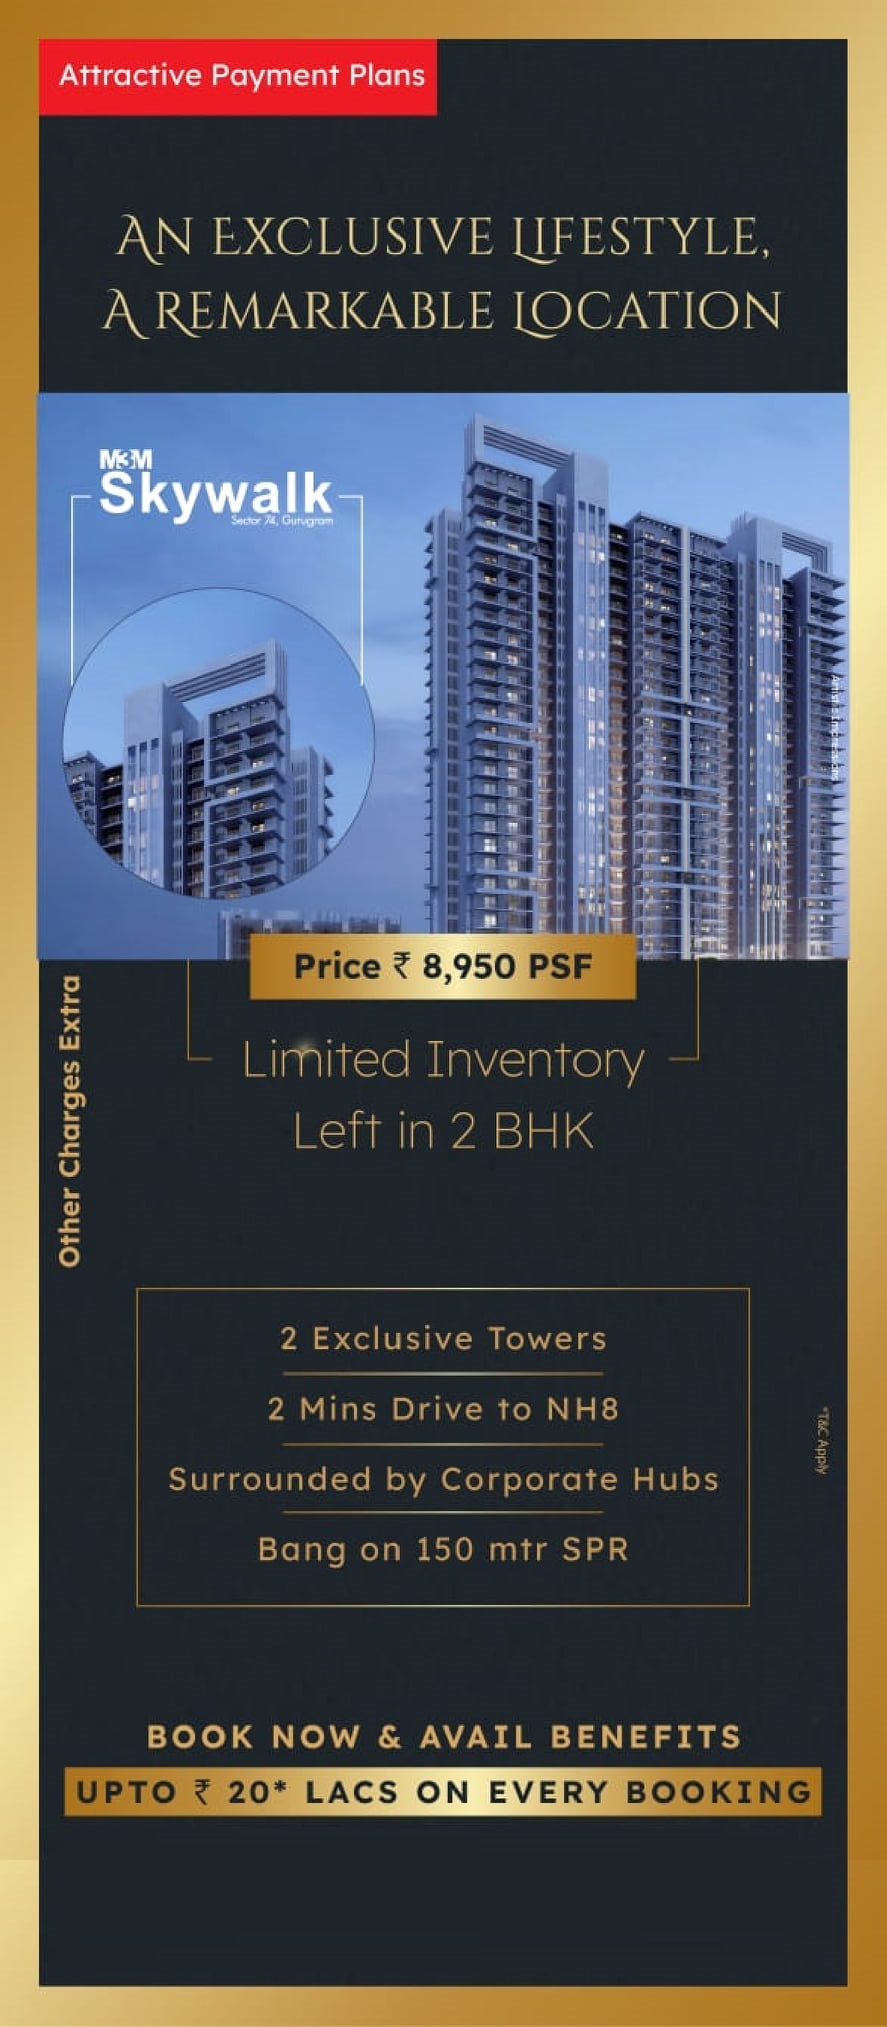 Book now & avail benefits up to Rs 20 Lacs on every booking at M3M Skywalk in Sector 74, Gurgaon Update